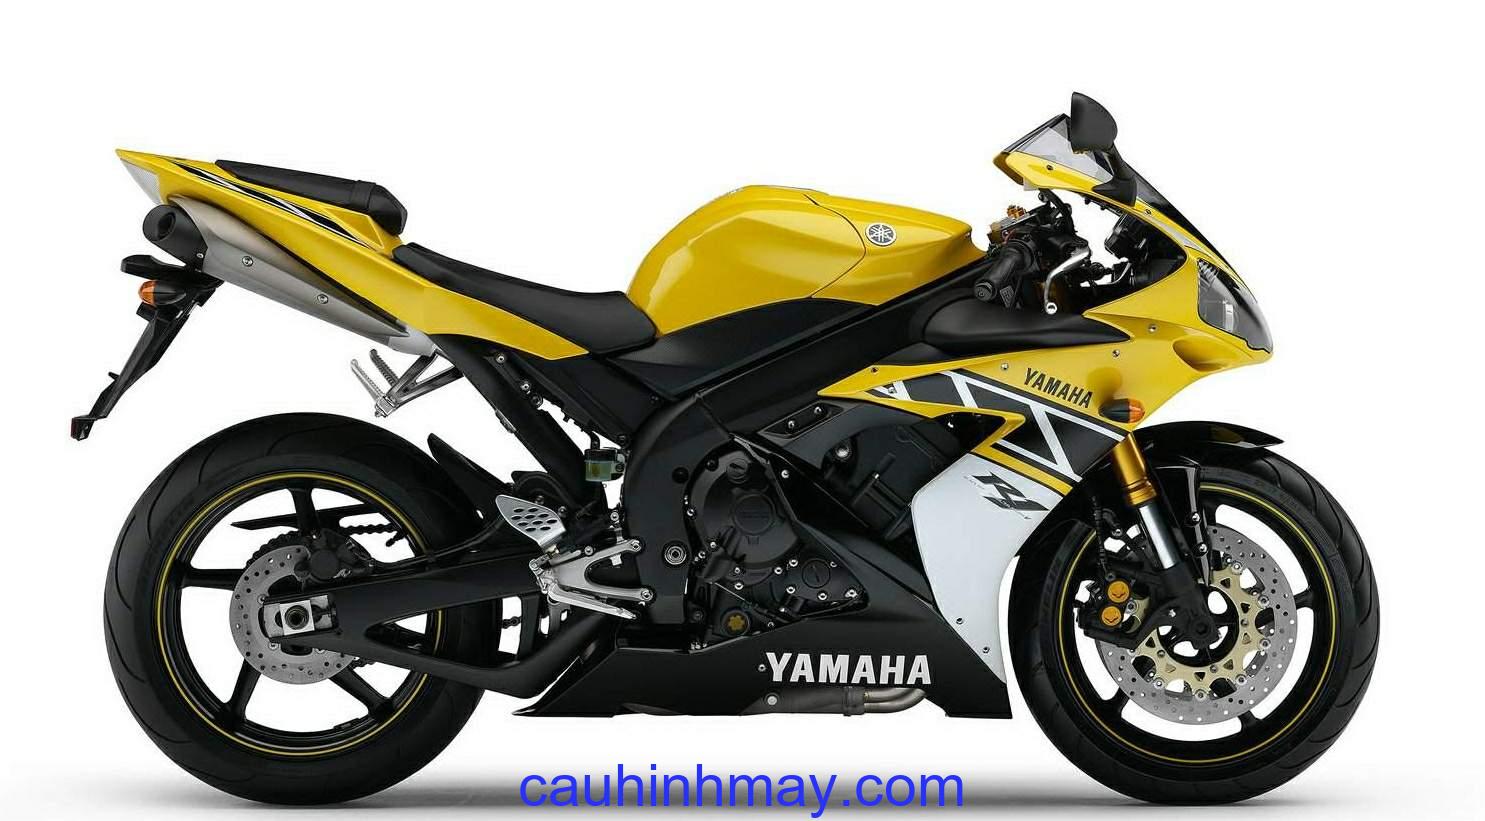 YAMAHA YZF1000 R1 50TH ANNIVERSERY SPECIAL EDITION - cauhinhmay.com